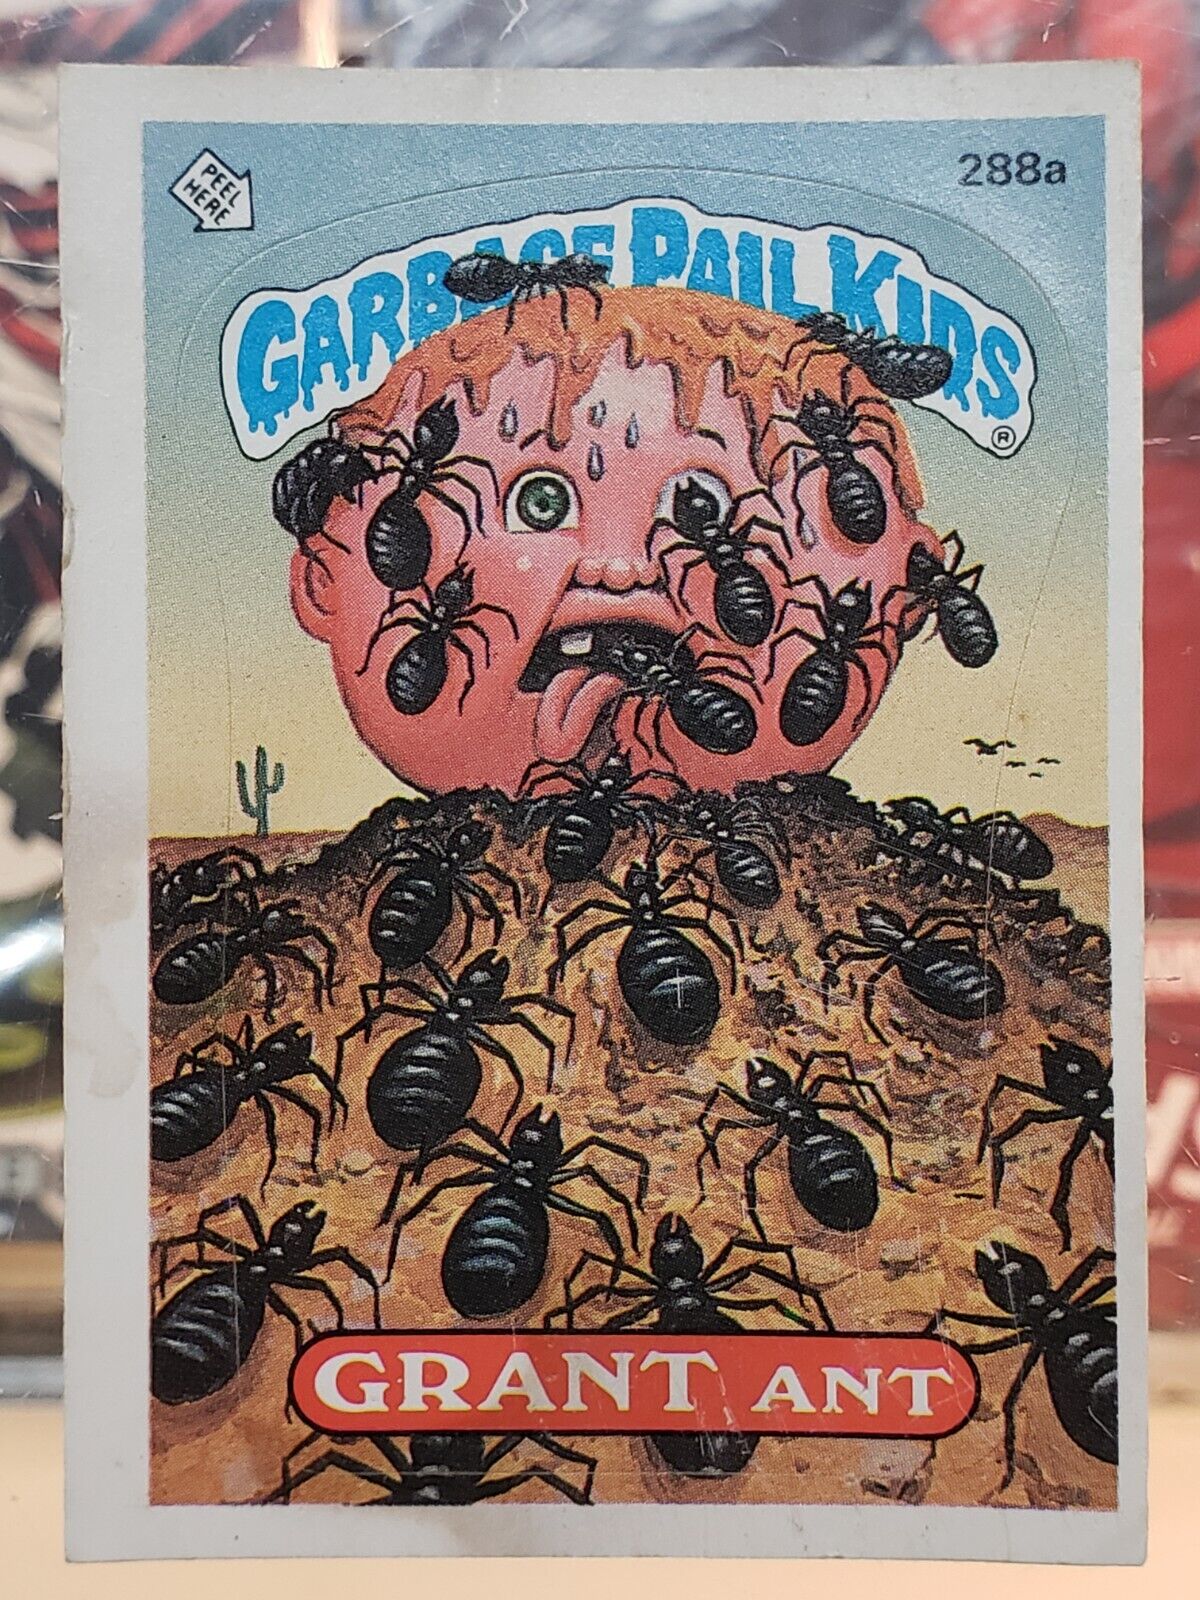 Topps Original Garbage Pail Kids 288a GRANT ANT. GpK card, VG Off center